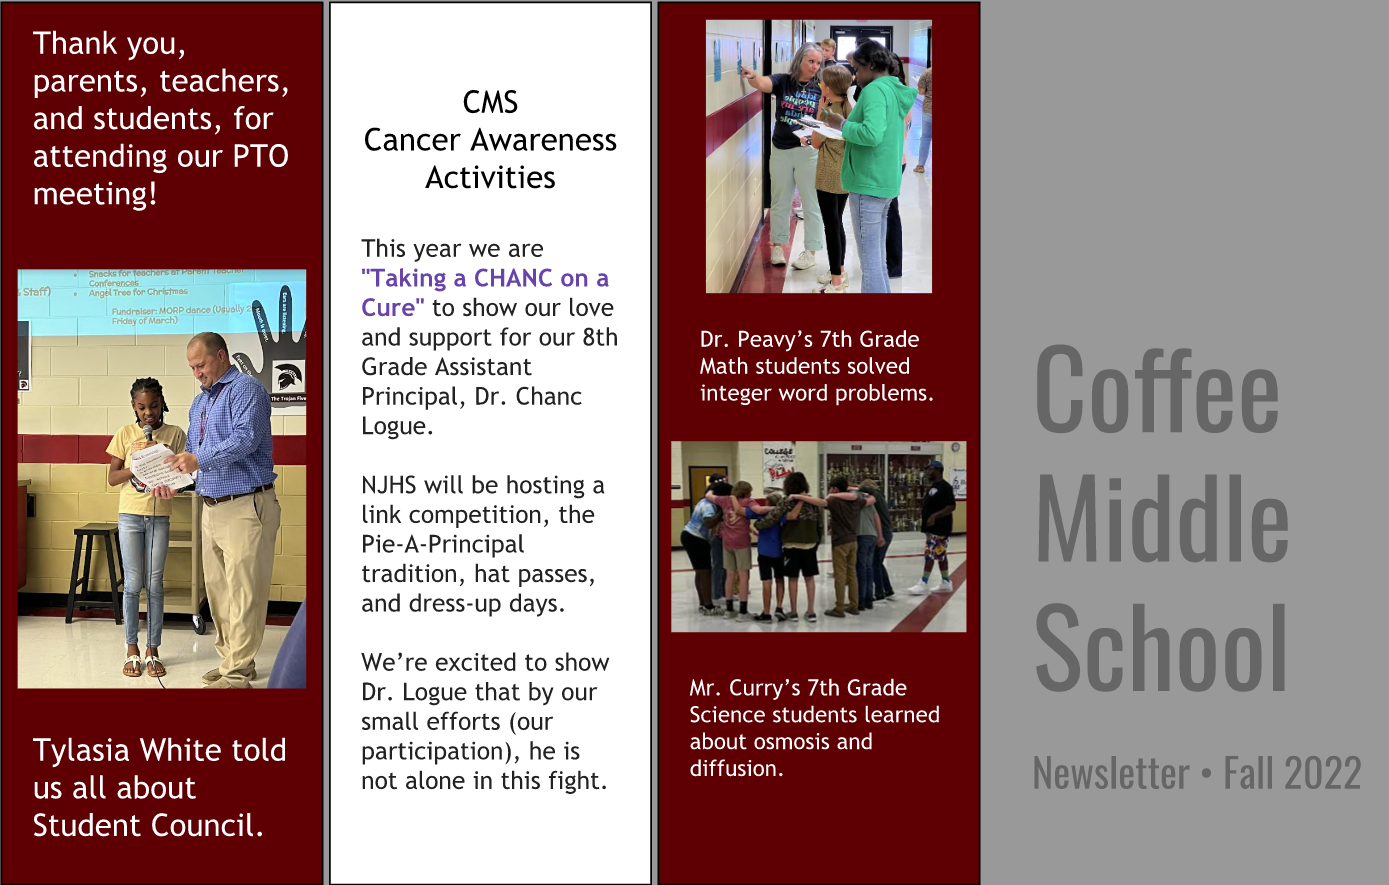 Coffee Middle School Fall 2022 Newsletter 